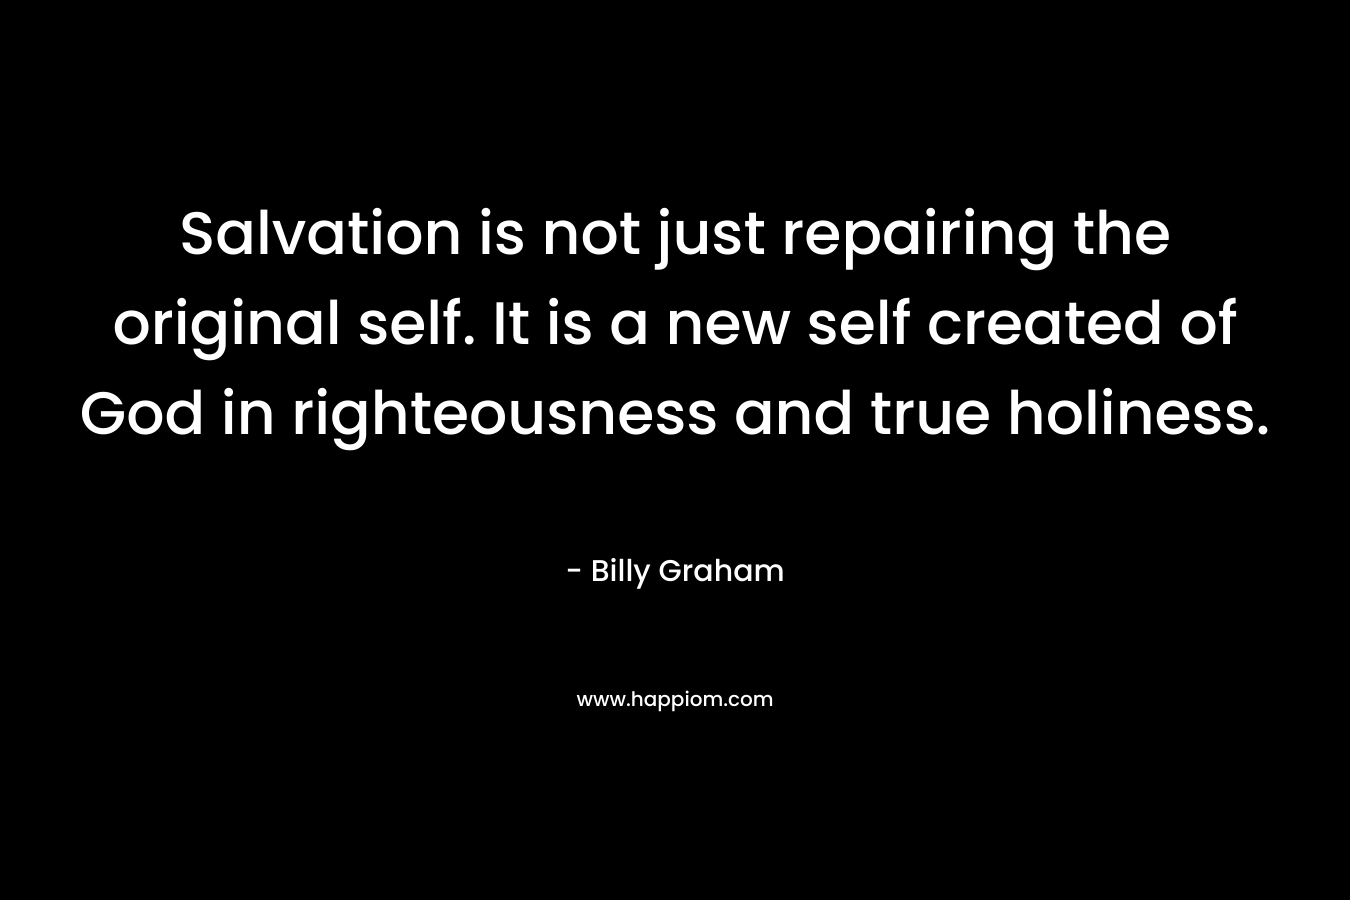 Salvation is not just repairing the original self. It is a new self created of God in righteousness and true holiness.